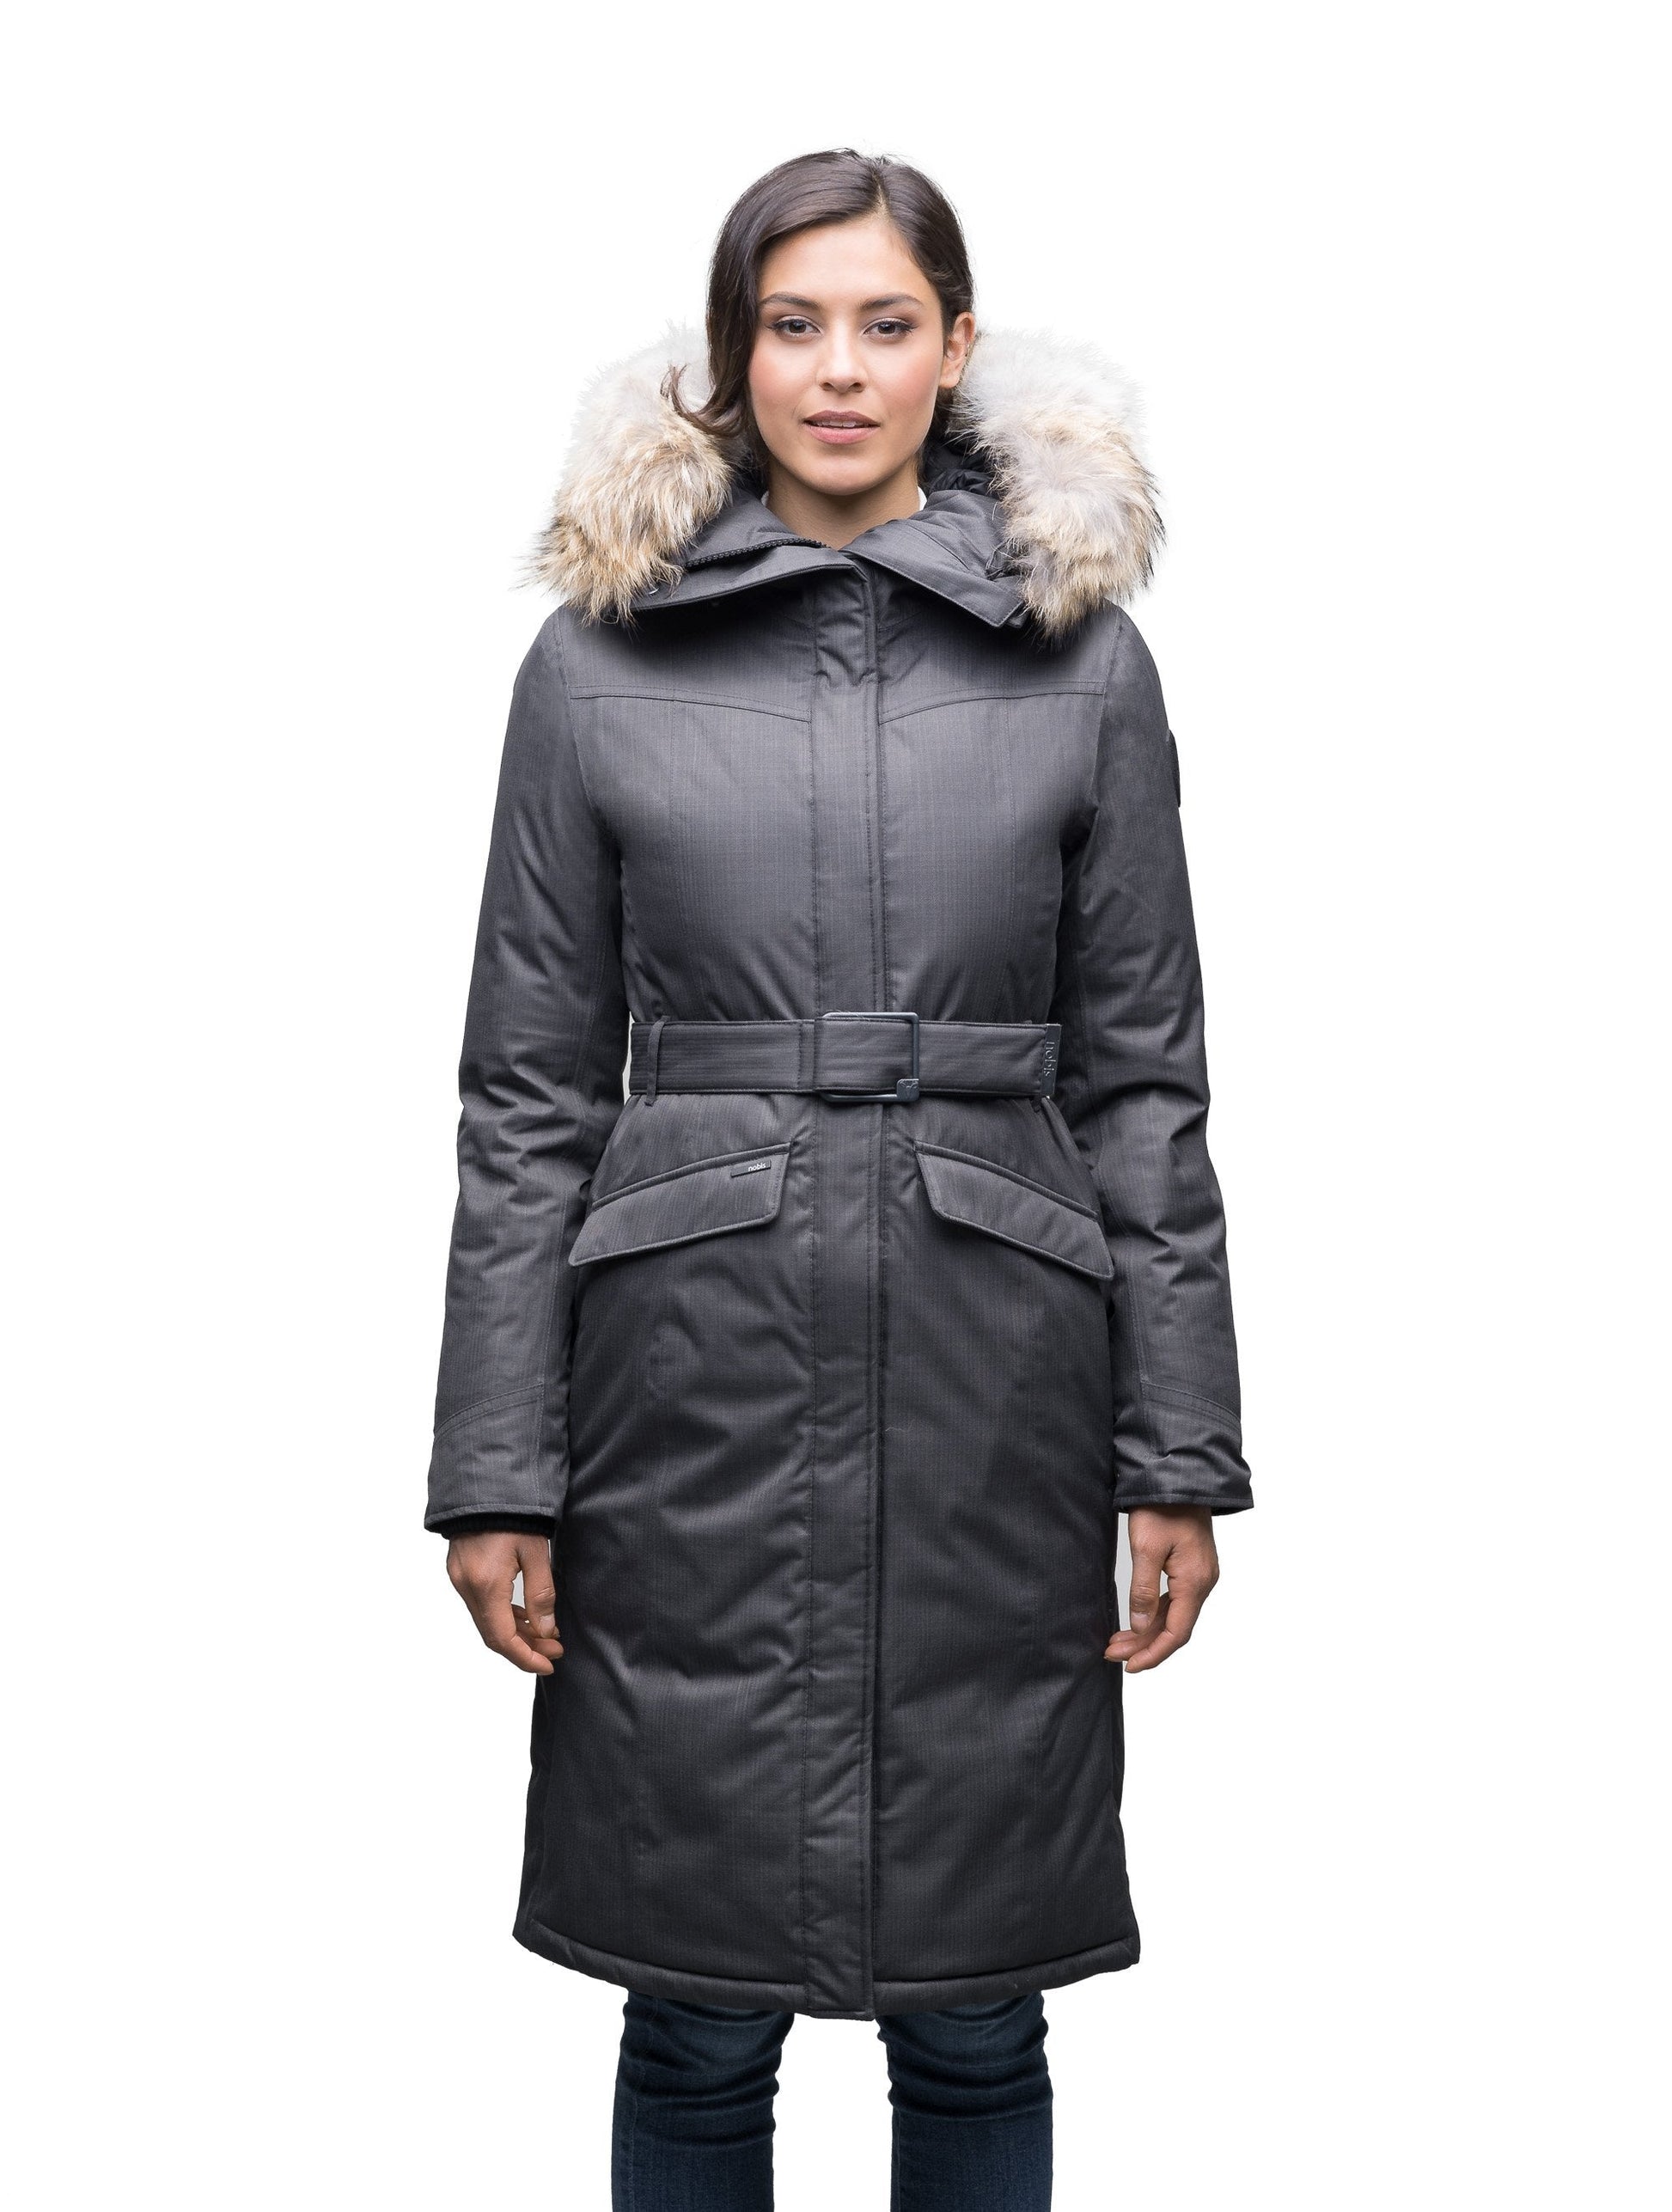 Women's maxi down filled parka with calf length hem in CH Steel Grey